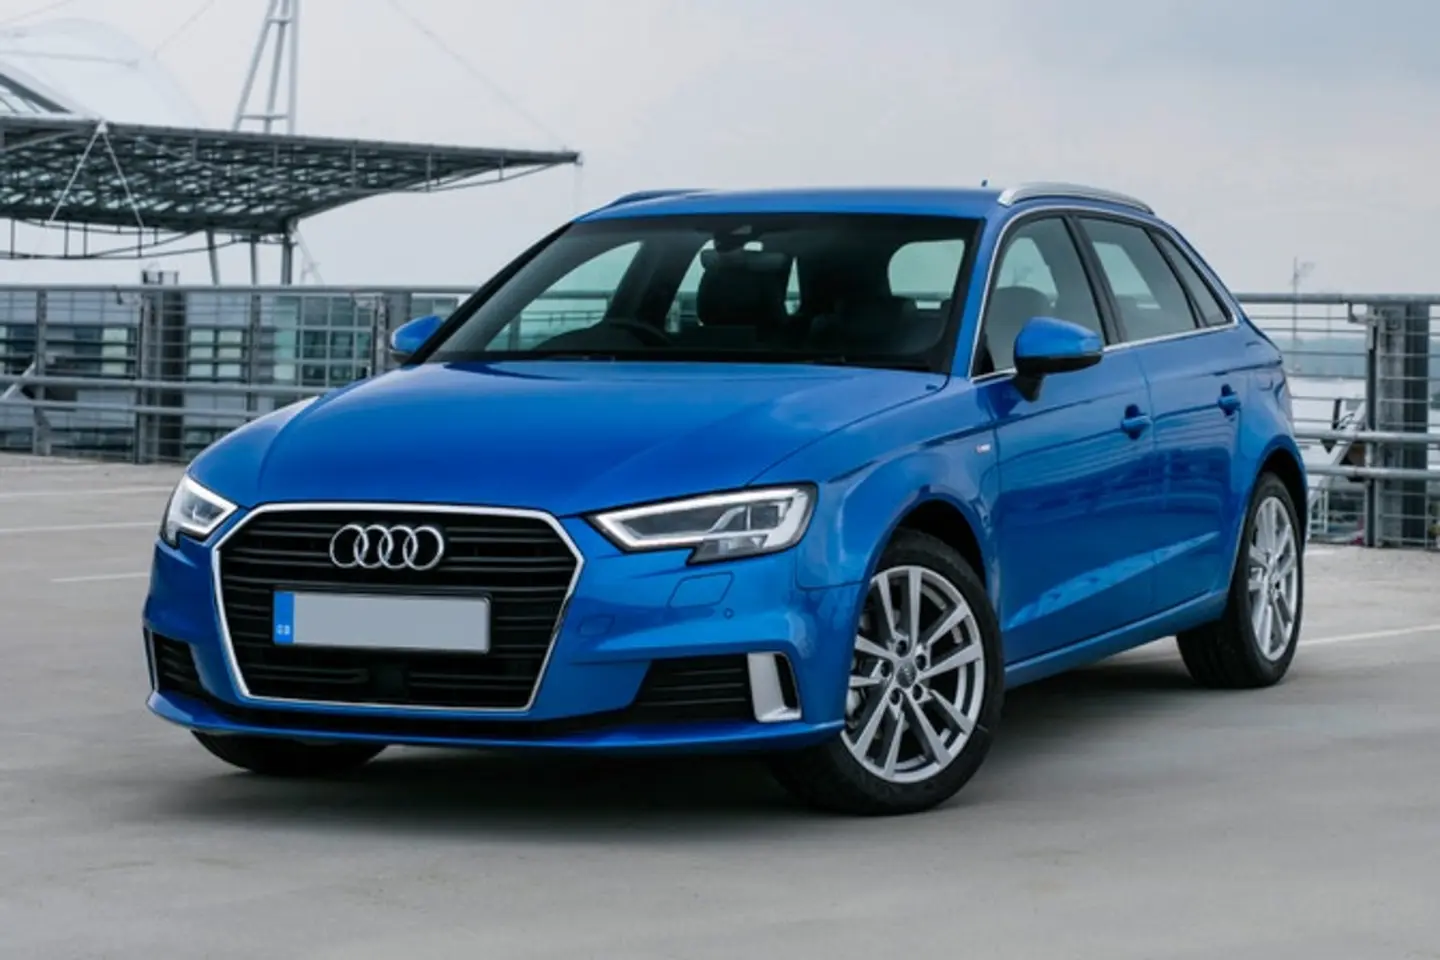 The exterior of a blue Audi A3